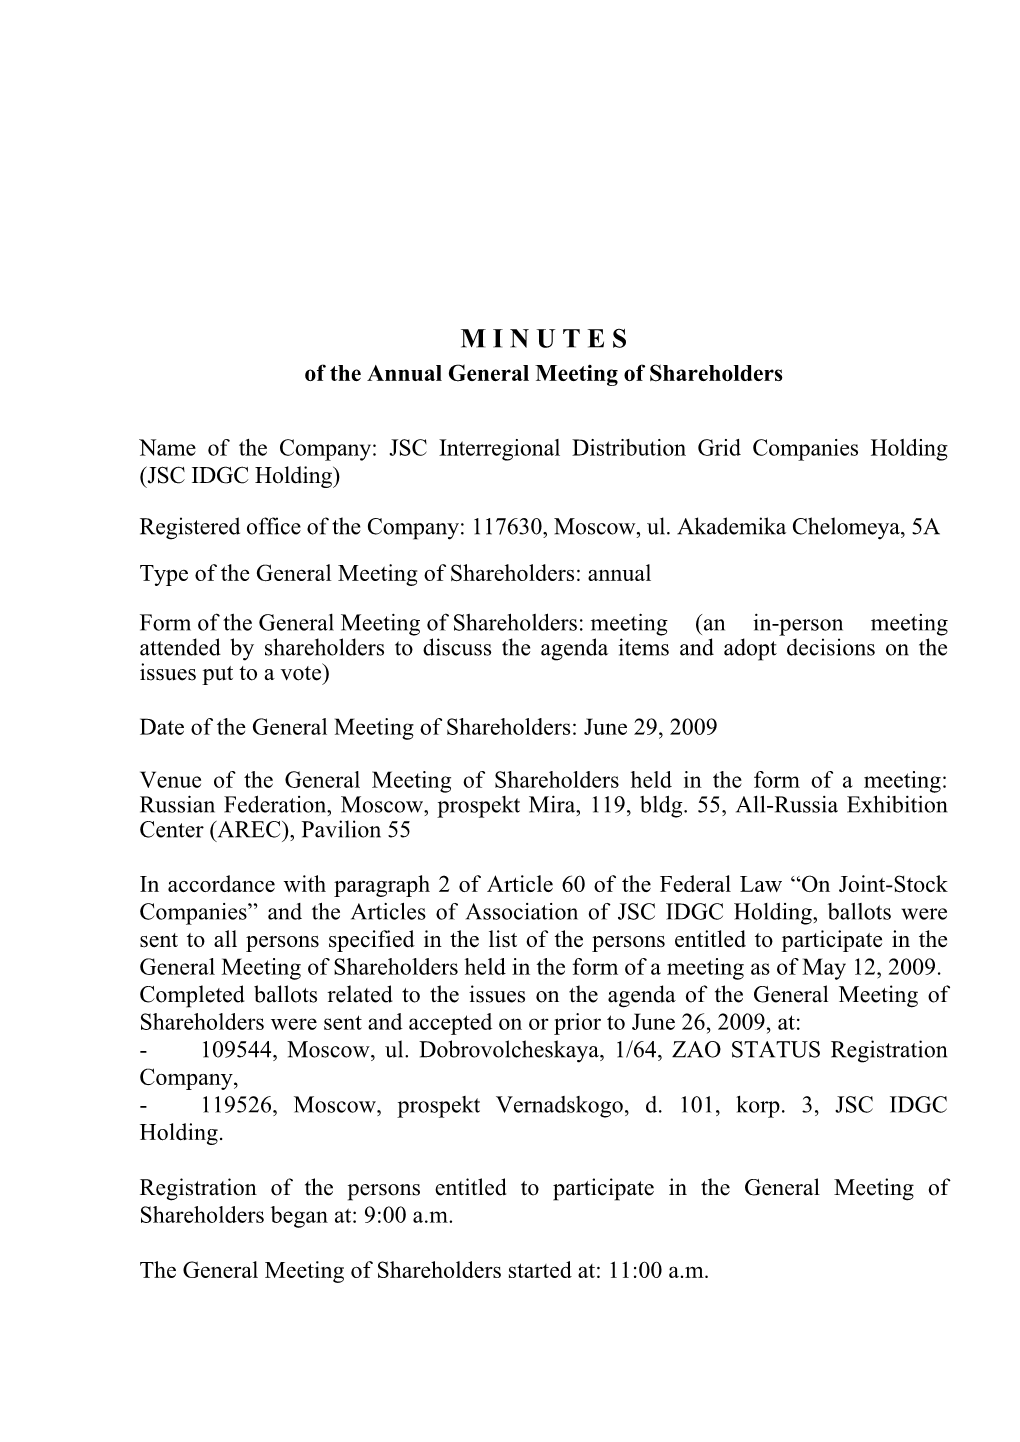 MINUTES of the Annual General Meeting of Shareholders June, 29